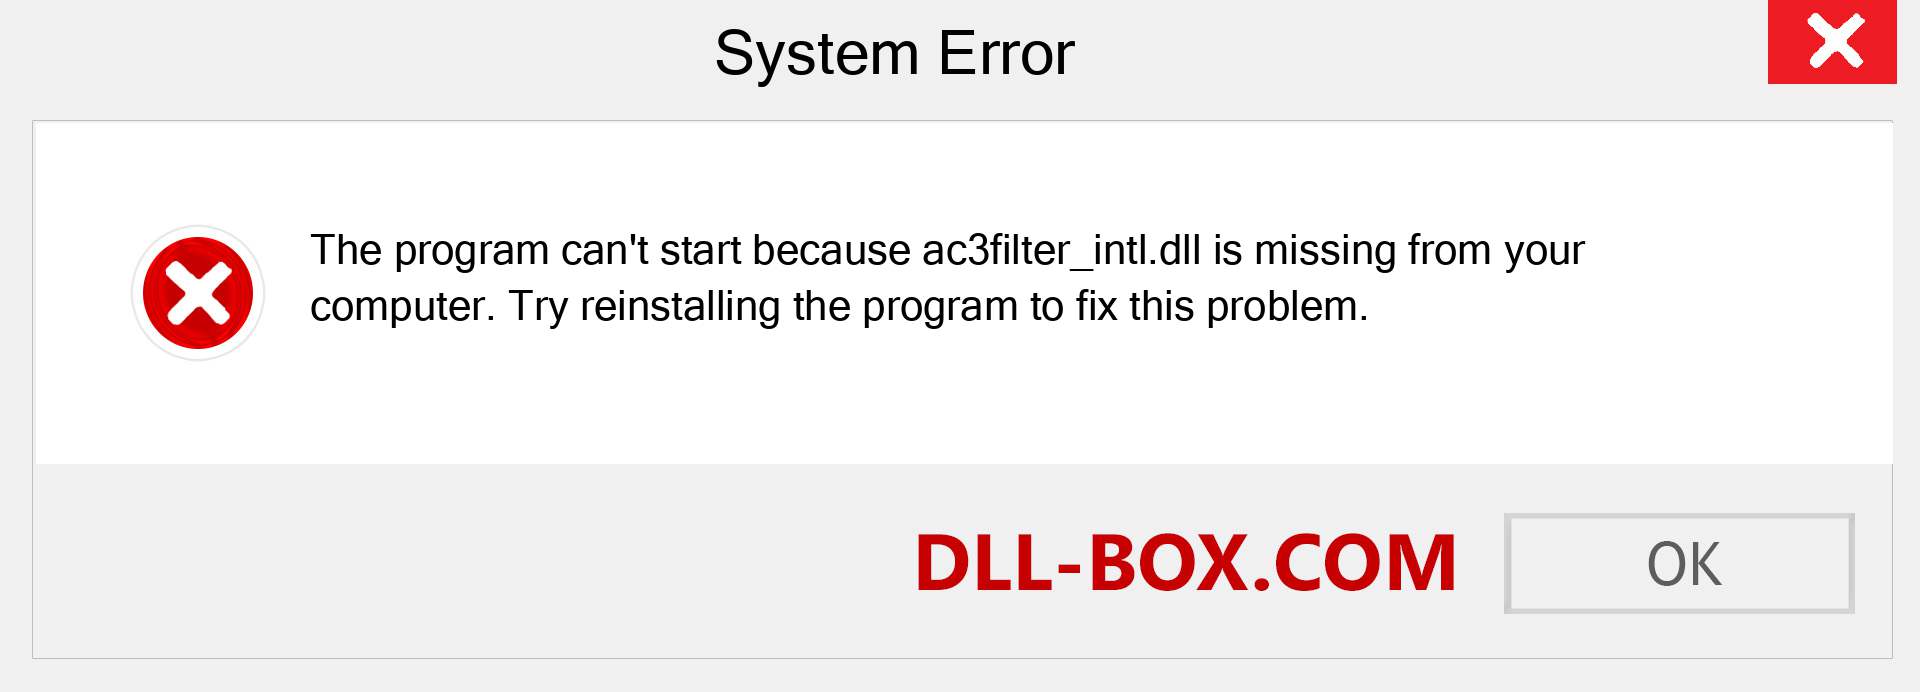  ac3filter_intl.dll file is missing?. Download for Windows 7, 8, 10 - Fix  ac3filter_intl dll Missing Error on Windows, photos, images